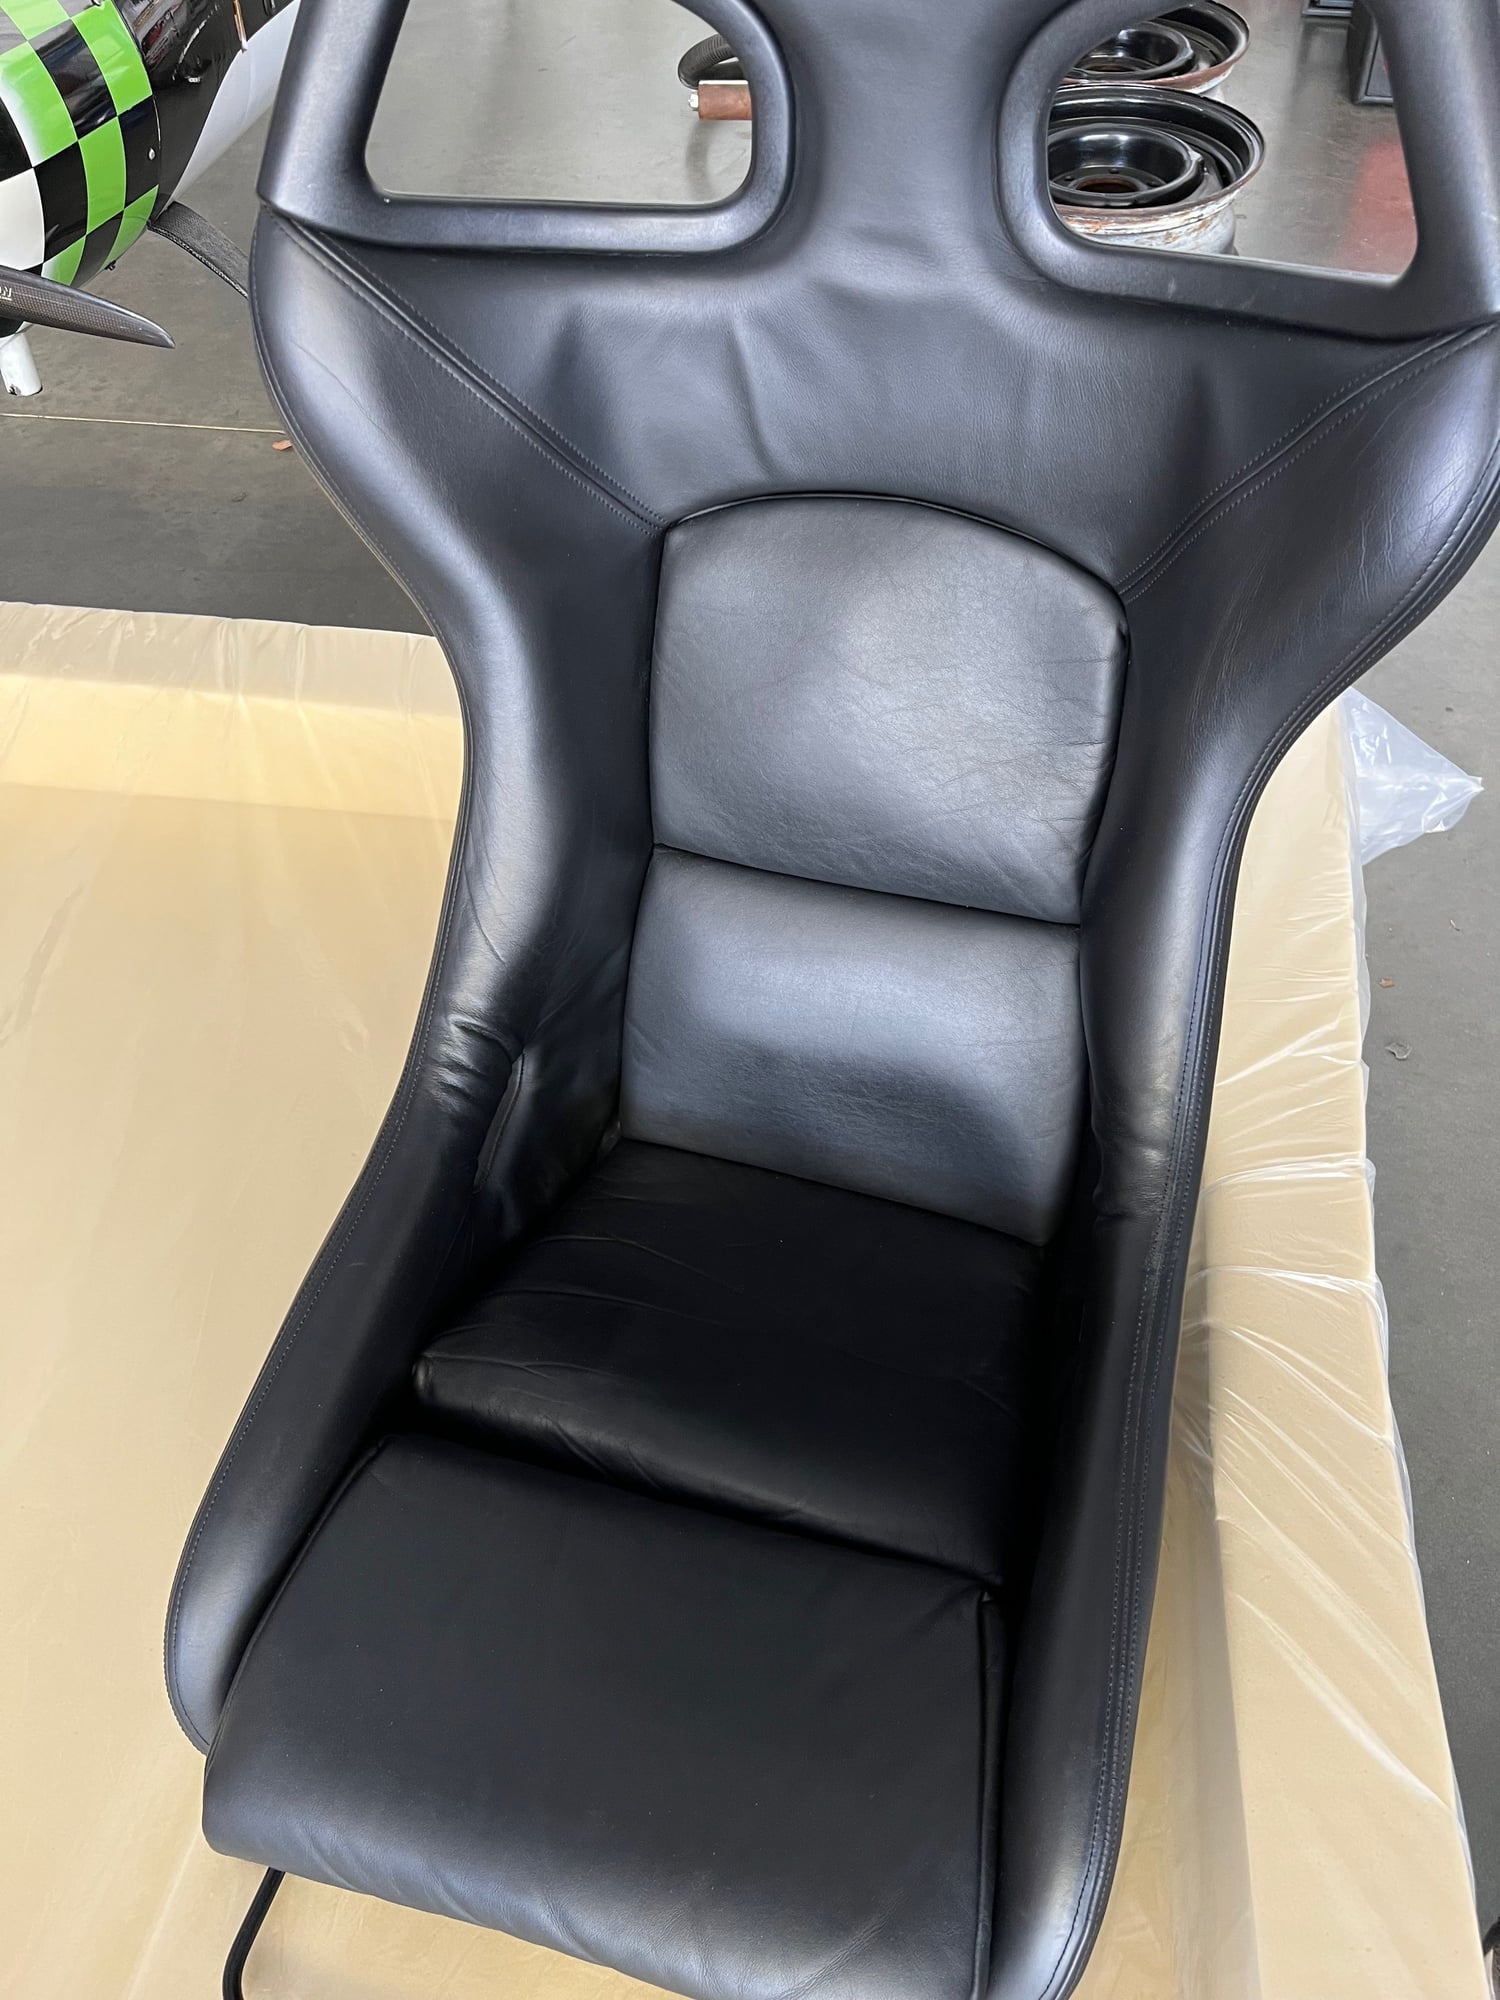 Interior/Upholstery - Porsche 996 GT3 Seats for 993 - Used - 1995 to 1998 Porsche 911 - Los Angeles, CA 90067, United States